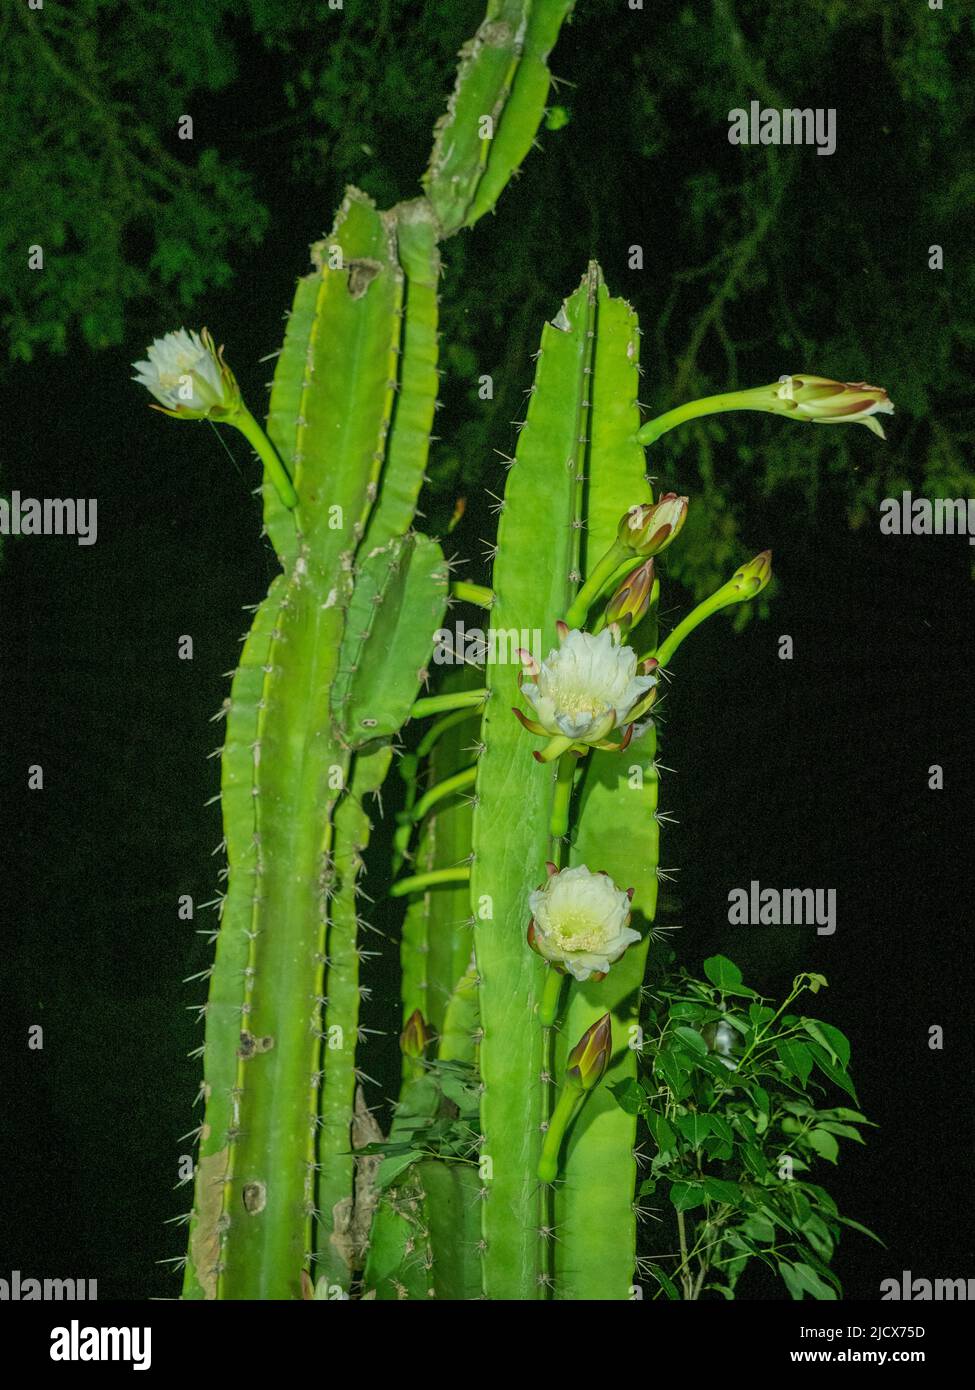 A night blooming columnar cactus from the Genus Cereus at Pouso Allegre, Mato Grosso, Pantanal, Brazil, South America Stock Photo